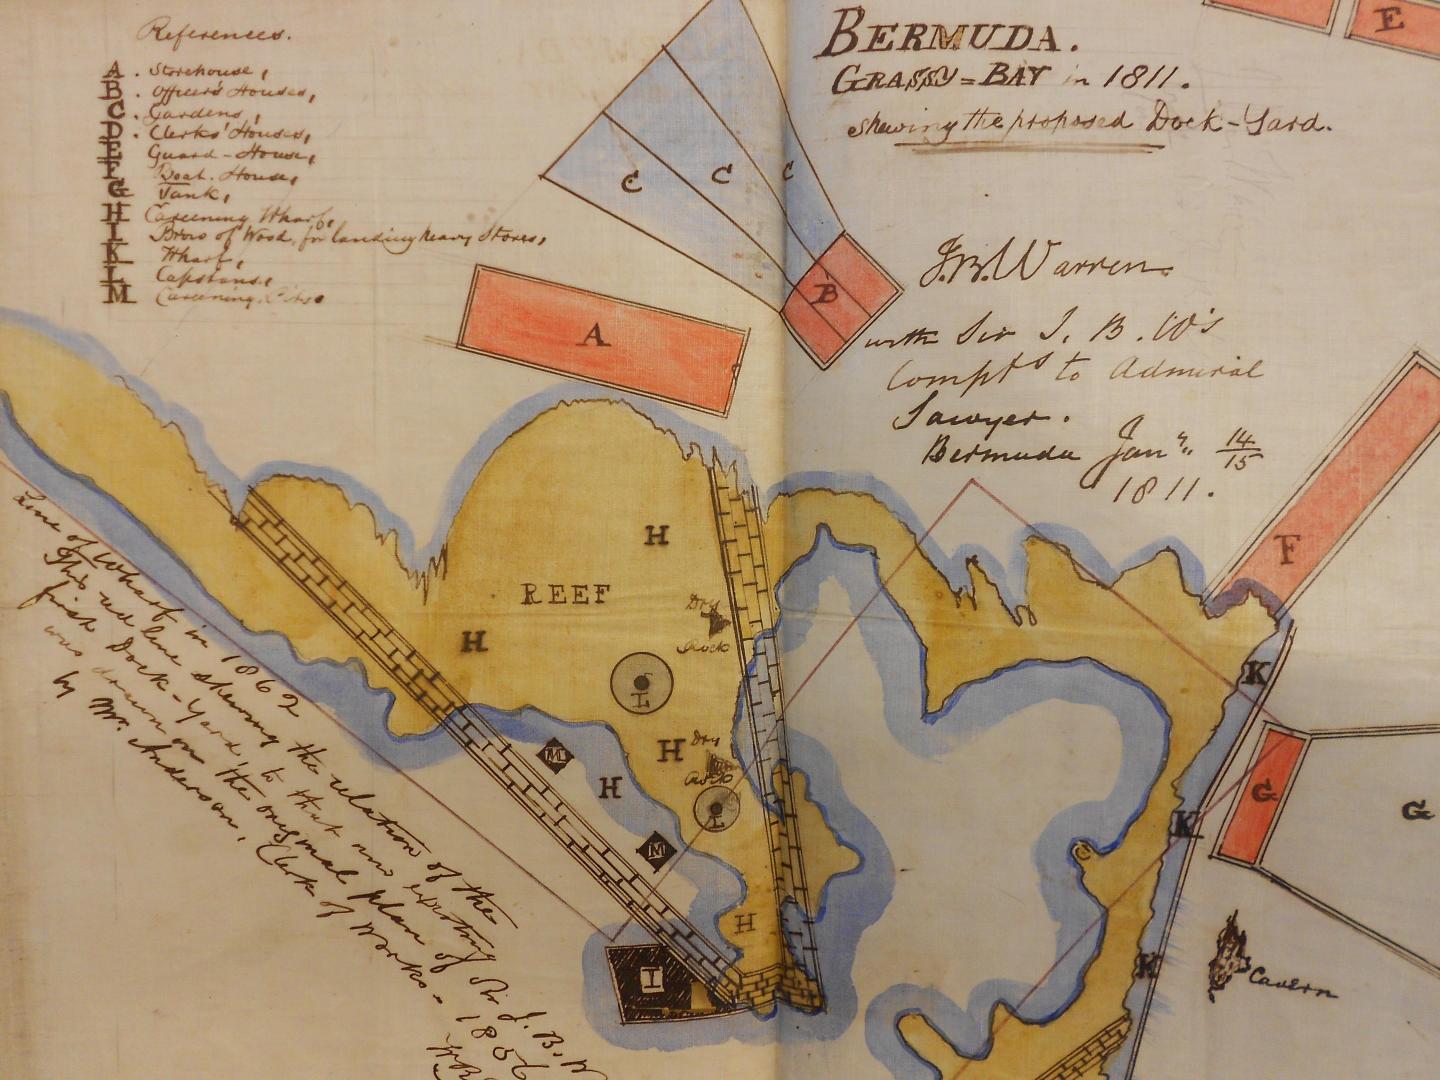 Map showing the proposed Dock Yard at Grassy Bay, Bermuda, in 1811.